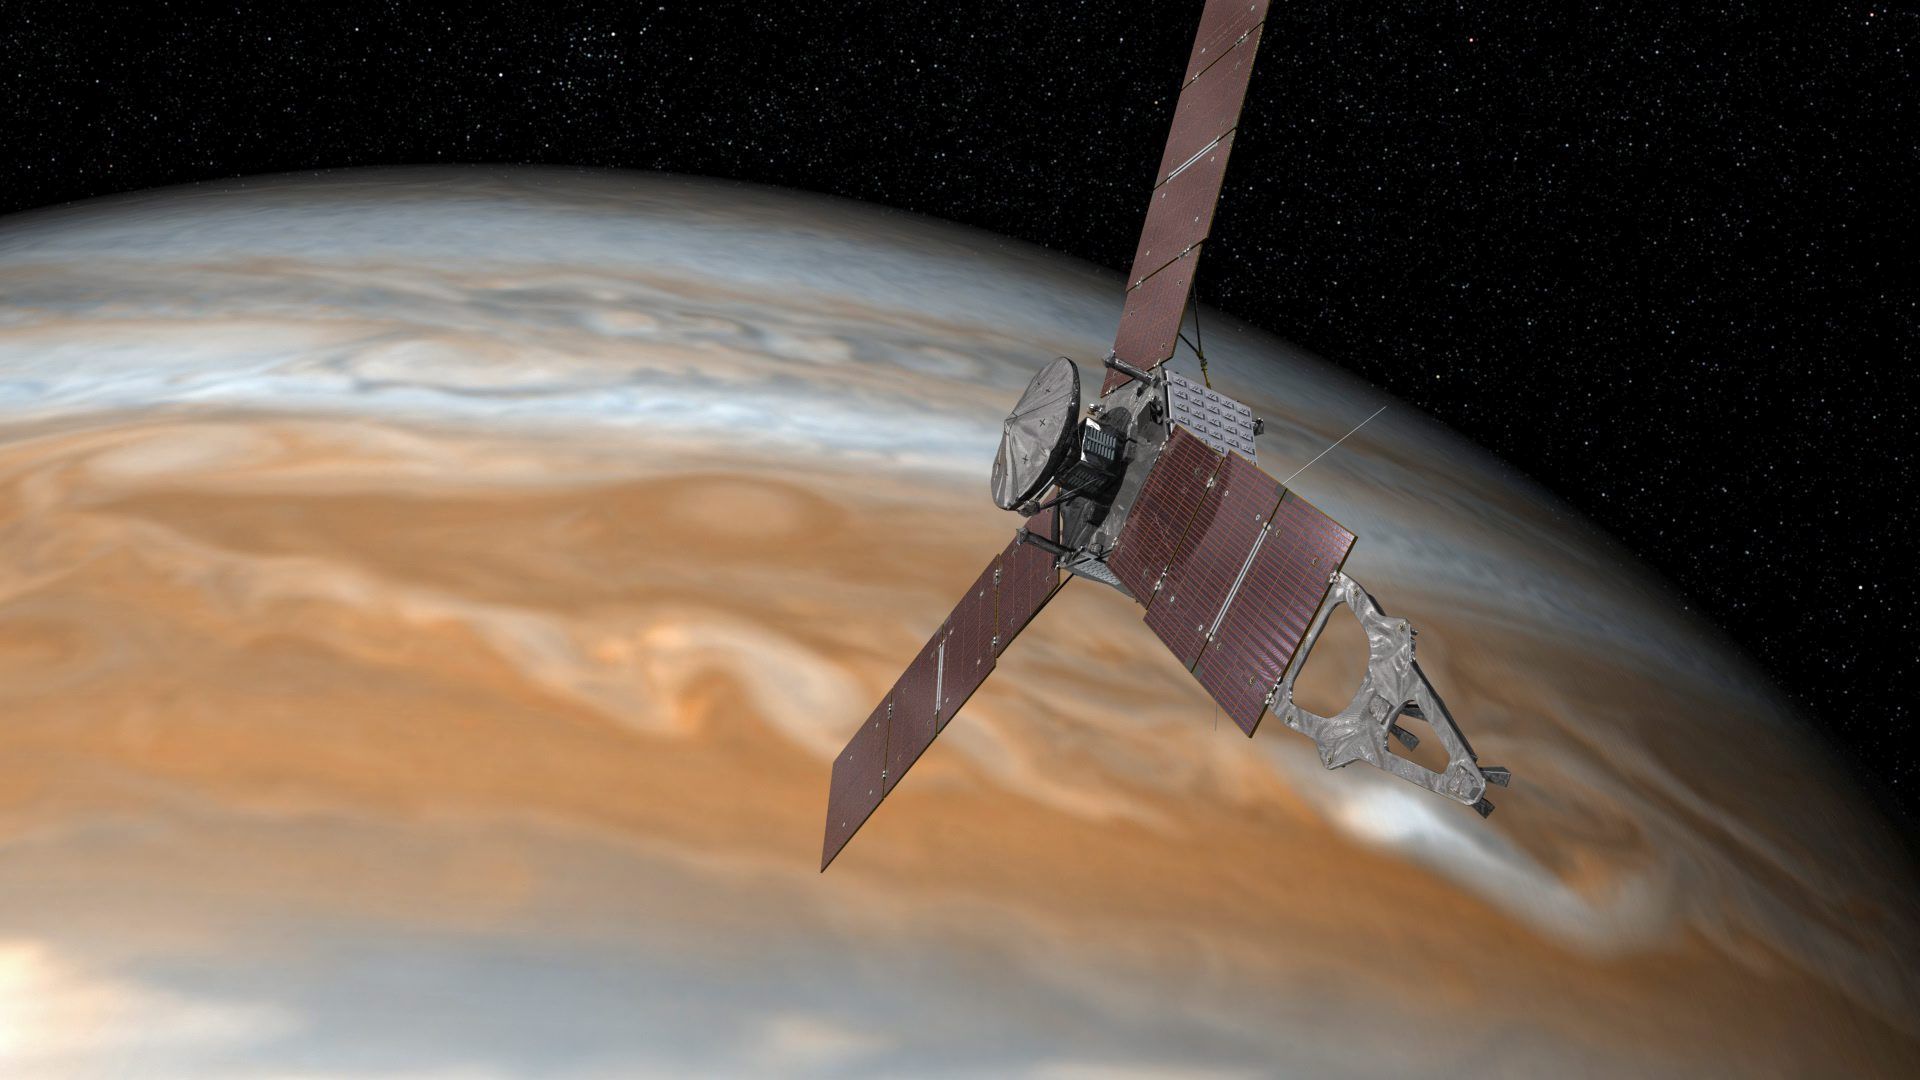 epa05370574 An undated handout image made available by NASA on 16 June 2016 shows an artist's rendering of NASA's Juno spacecraft making one of its close passes over Jupiter. According to NASA, ON 04 July 2016 NASA will fly a solar-powered spacecraft the size of a basketball court within 2,900 miles (4,667 kilometers) of the cloud tops of our solar system’s largest planet.  EPA/NASA / HANDOUT  HANDOUT EDITORIAL USE ONLY